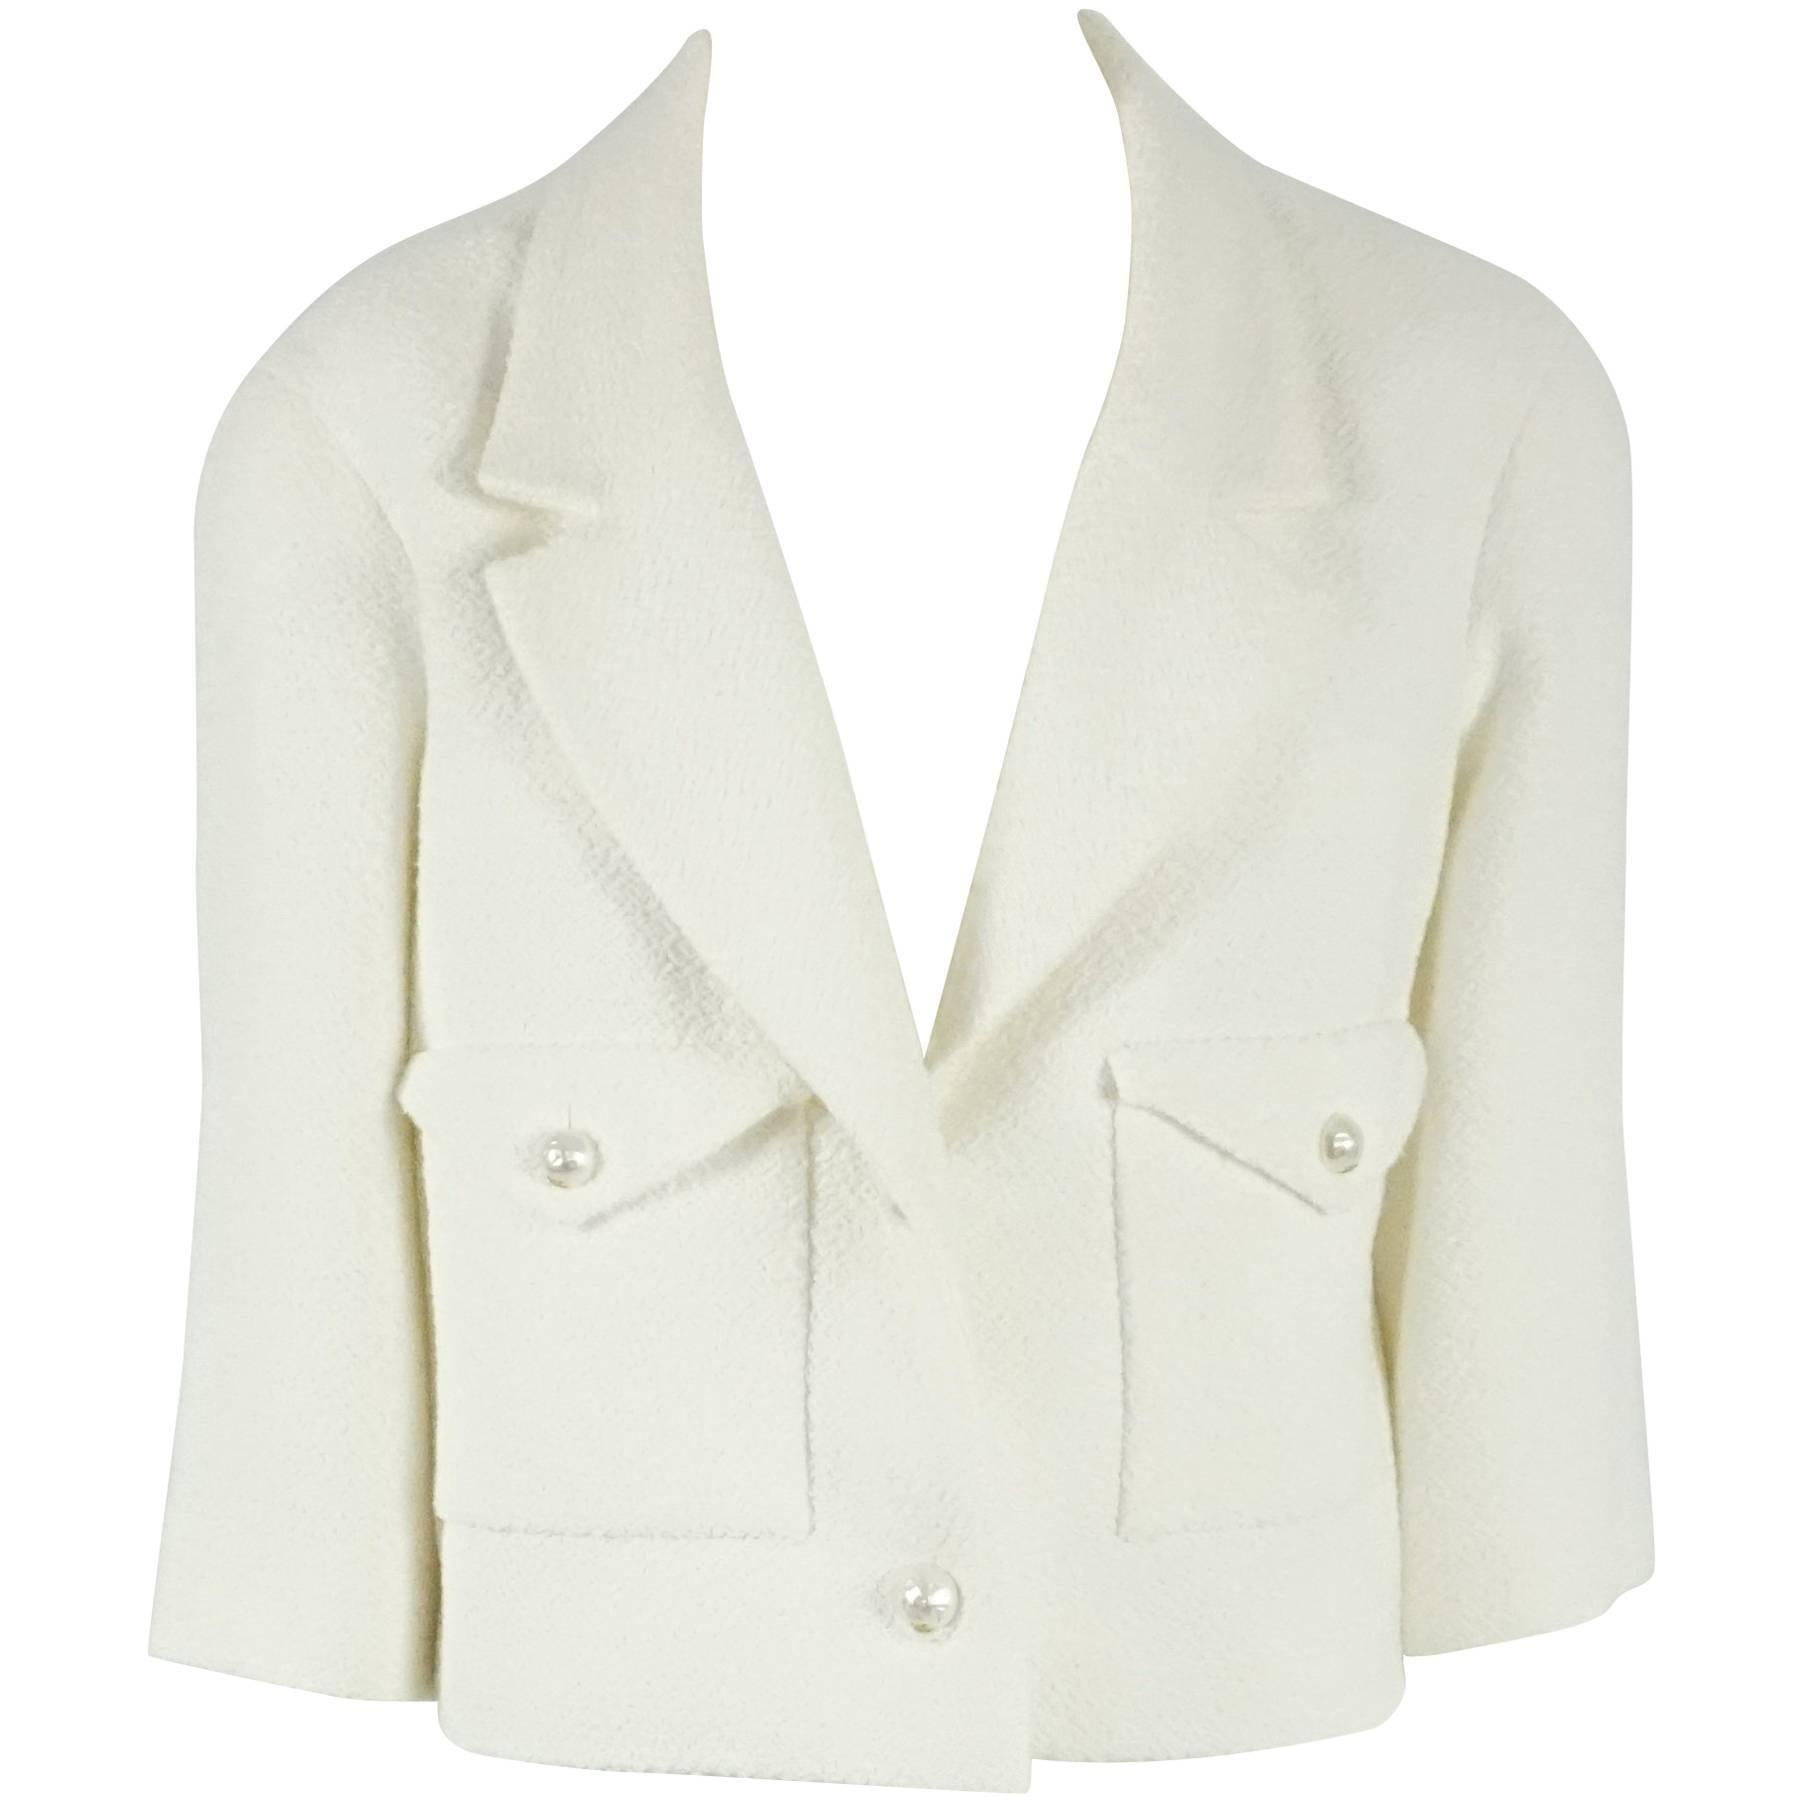 Chanel White Cotton/Silk Textured Short Jacket with Pearl Buttons - 44  